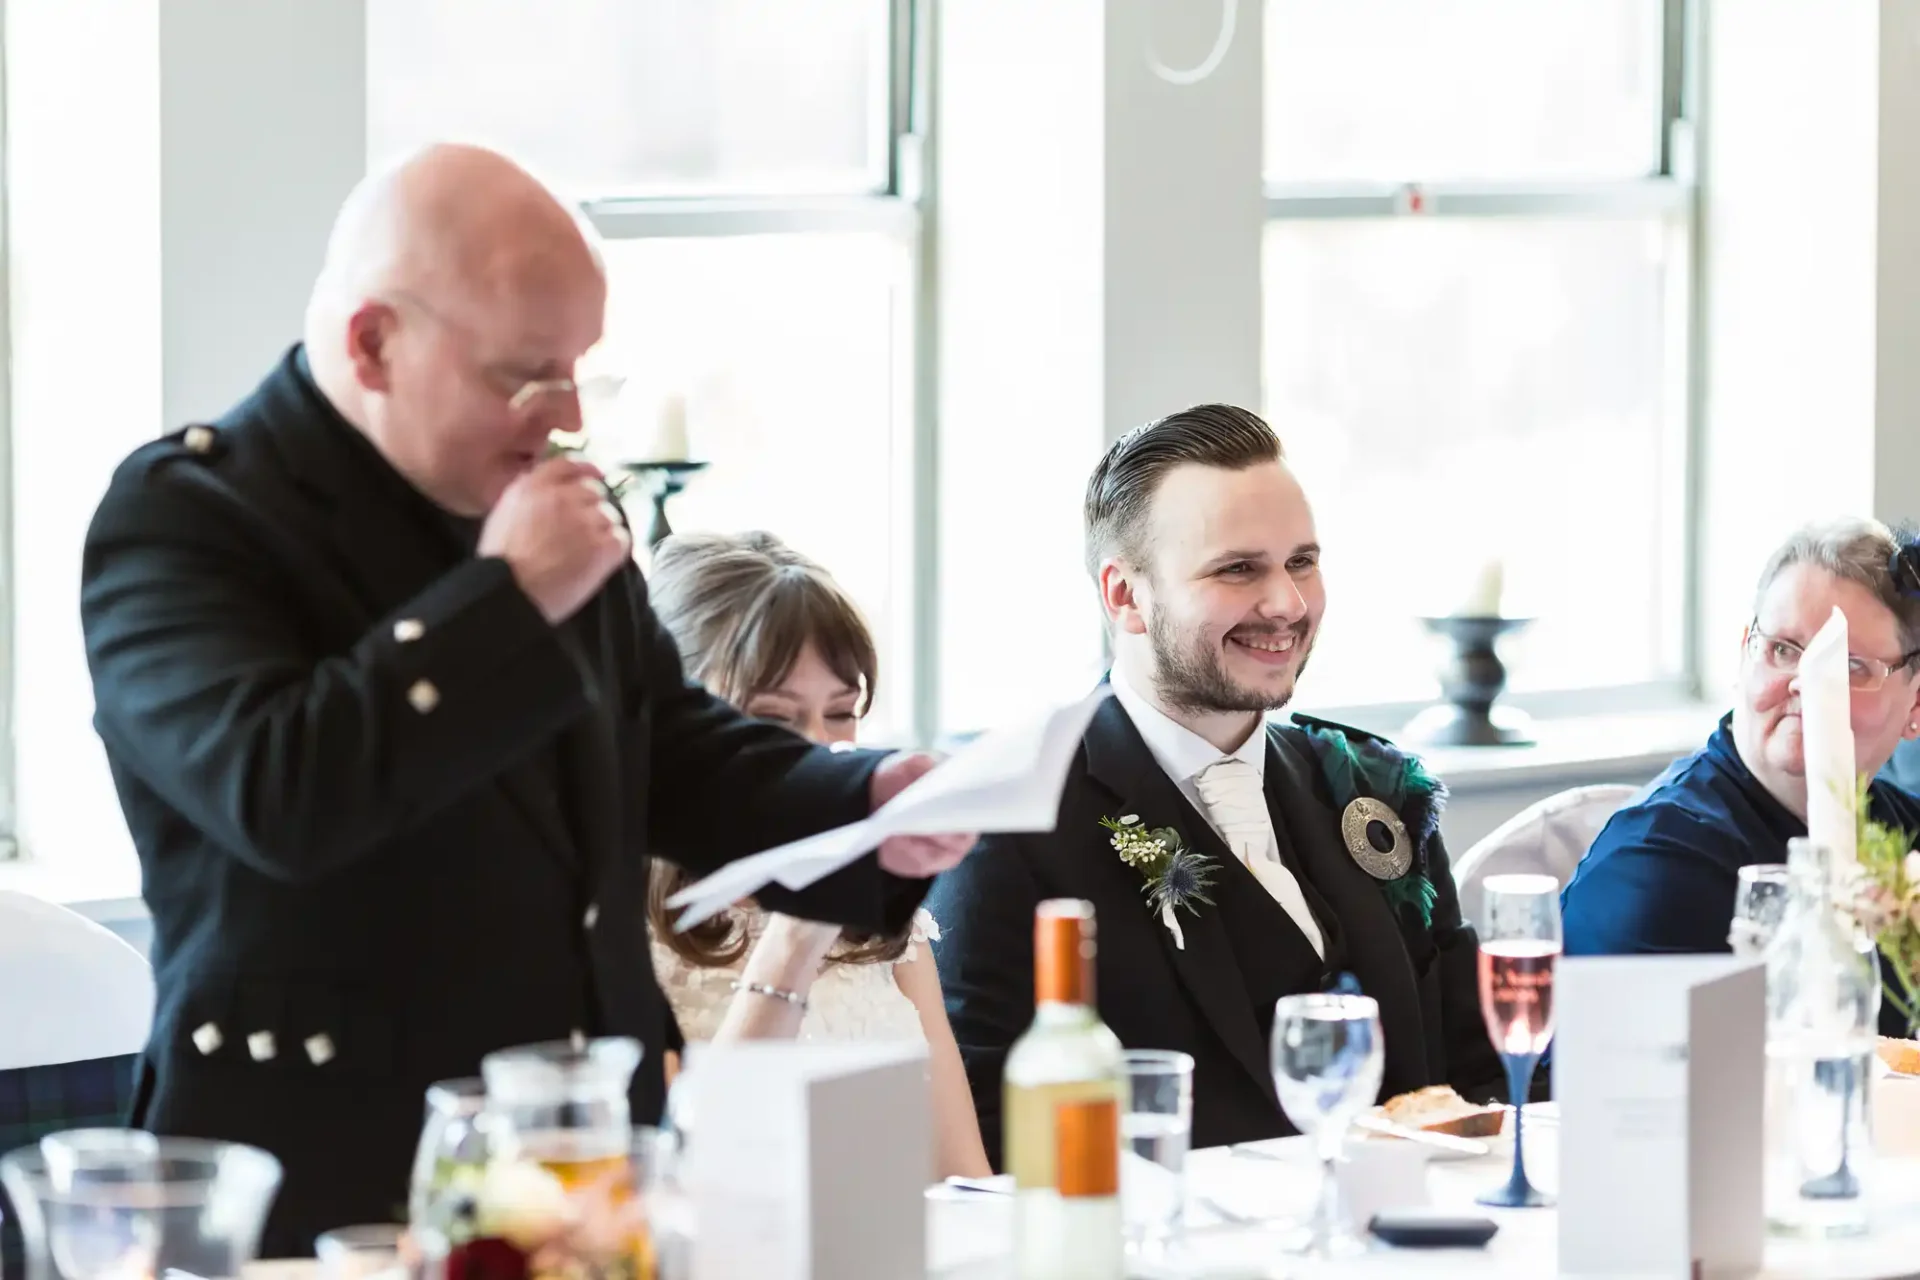 Man in a suit smiling at a wedding table while another man laughs and covers his mouth with a napkin.